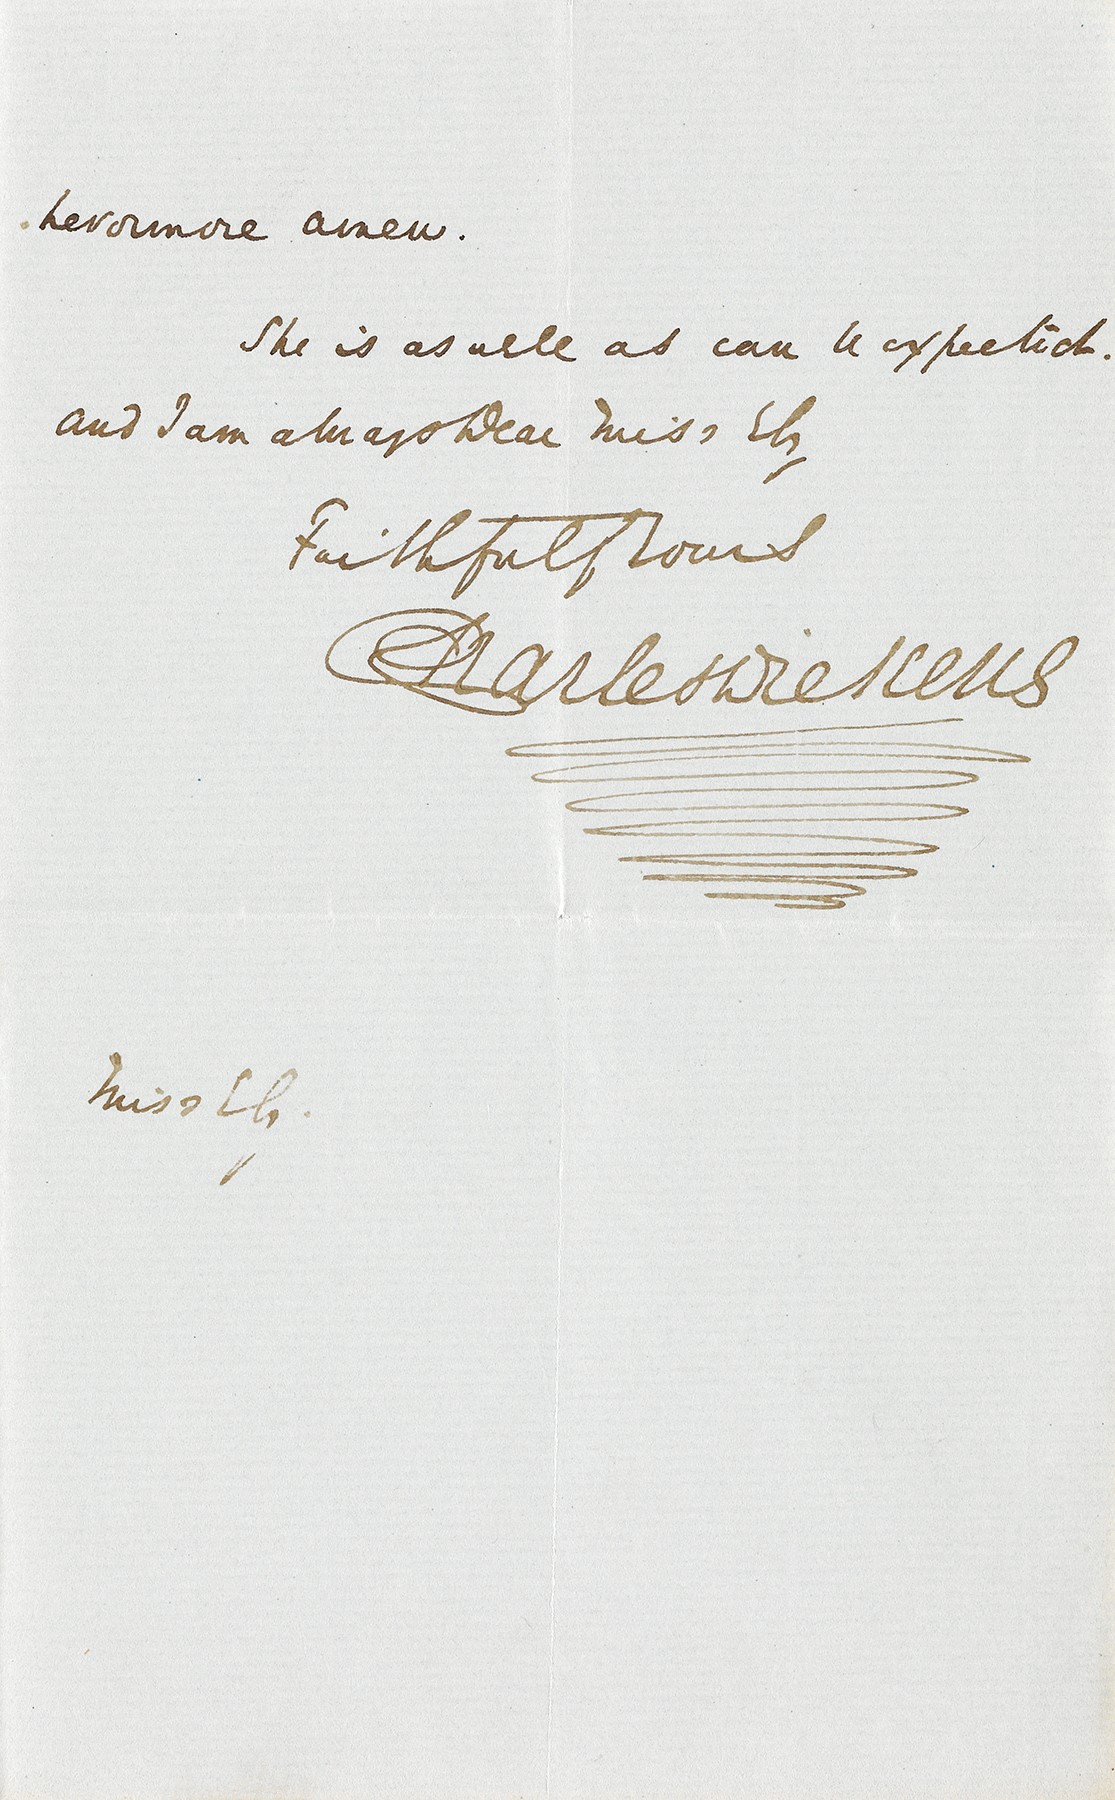 A letter written by Charles Dickens